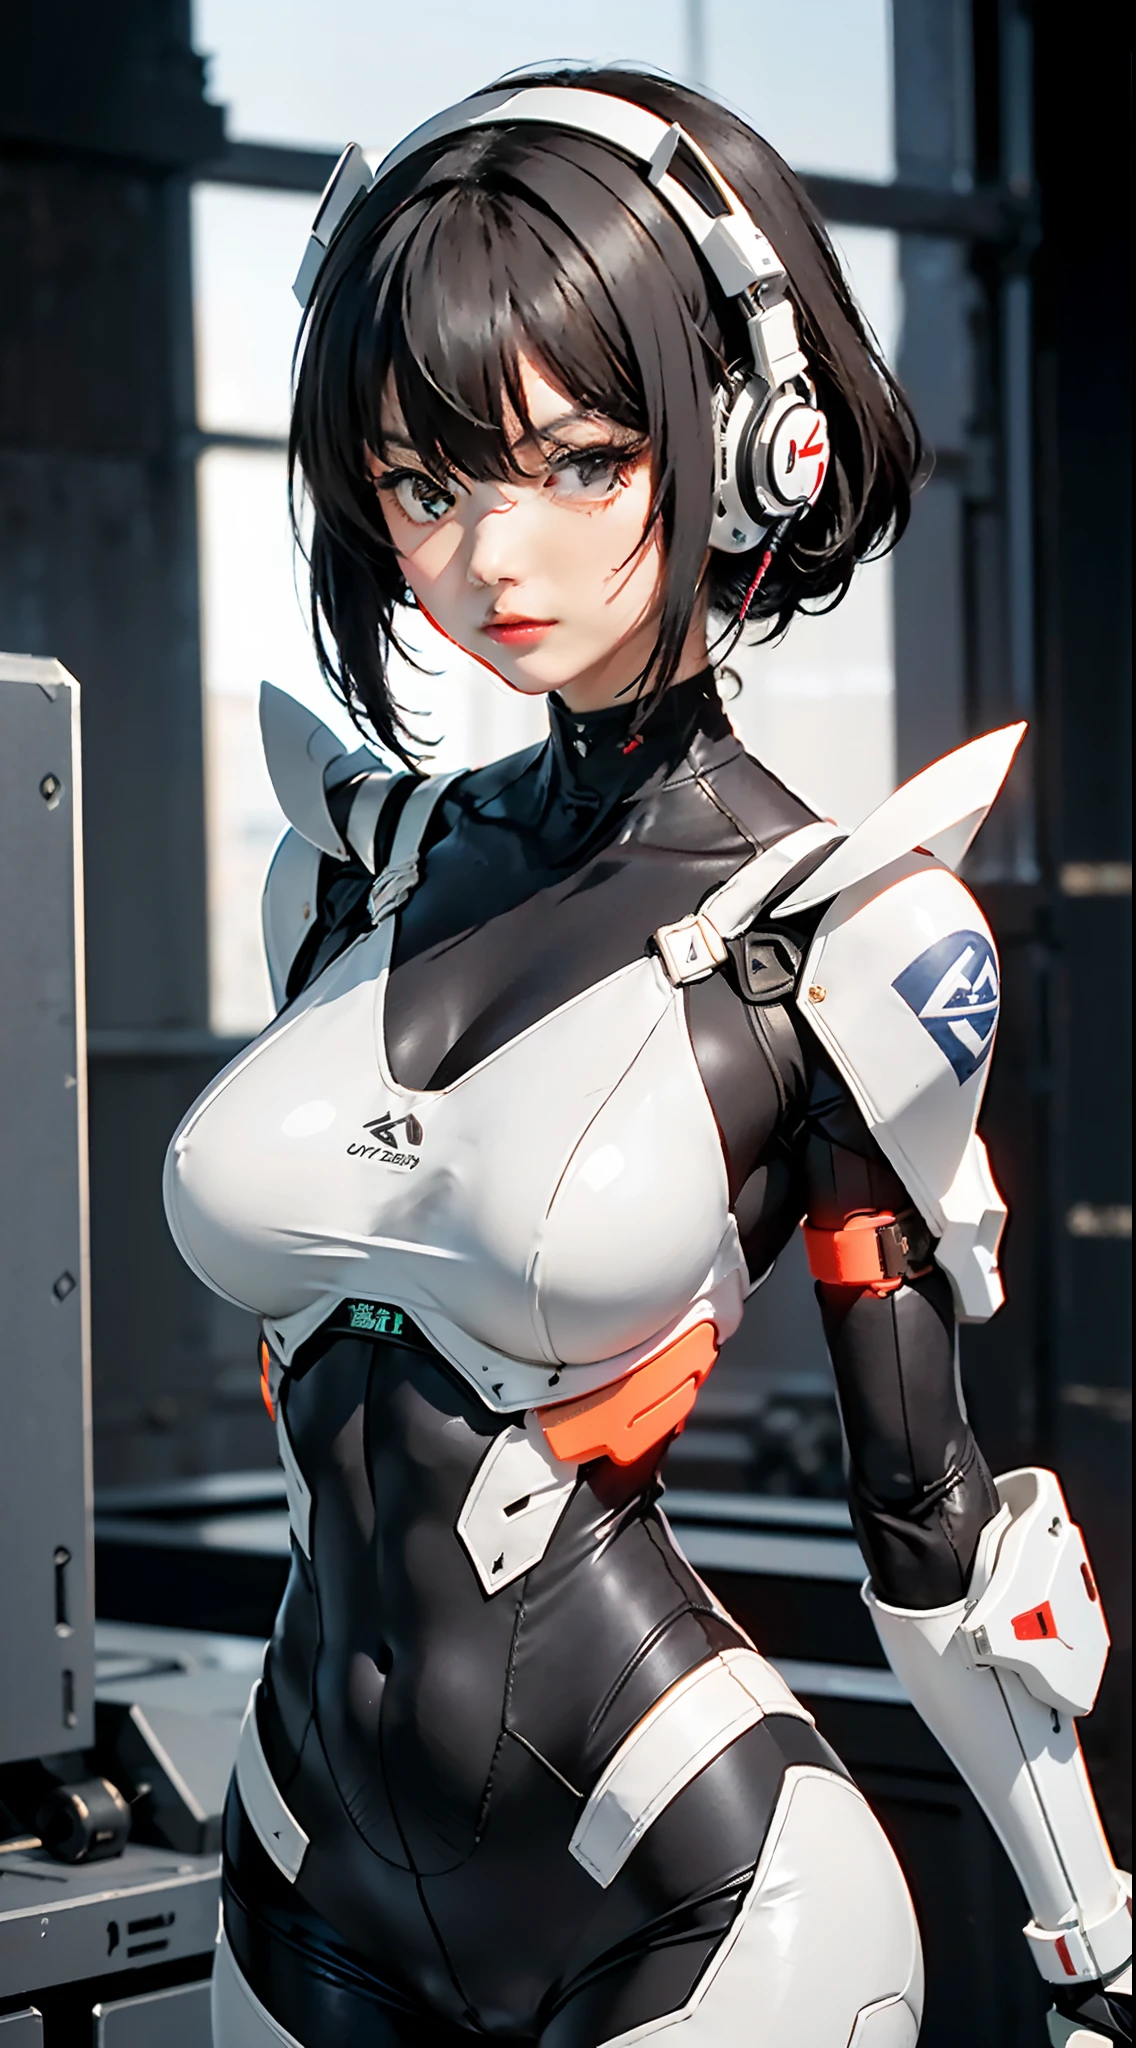 ulzzang -6500-v1.1,(Raw foto:1.2), (Photorealsitic:1.4), hight resolution、An ultra-high picture quality。 （Detailed super beautiful one woman。Tall slender 24 years old、White technical wear and futuristic women's battlesuit（for urban warfare、Details will be described later.................）Please wear）,Equipped with a large laser rifle、Always ready to shoot、 disheveled short brown hair、Wearing a small headset、fullllbody, nffsw(HighDynamicRange),　Anisotropy Filtering,depth of fields,Maximum clarity and sharpness,, ((Beautiful large breast）（Sagging udder）、((The chest and lower body are lightly armed and the skin is exposed, however、Can withstand combat))、Beautiful athlete thighs、Trained abs、skin tanned、 Realistic Professional Lighting,、　((dynamicposes))、 Sophisticated gaze　hereinafter、battle suits（for urban warfare）pronpt: Color scheme: Basic colors: blanche、Gunmetal and metal silver accents。 Suit design: With a shape that fits the curves of the body、Fine details、The visible part that supports the movement of muscles and joints。 Advanced electronics and sensors are built into the whole body、Especially the back of the hand and the arm、Stand out at the ankle。 Especially chest armor、backs、Placed on the thigh、Has the ability to prevent attacks from laser guns。 In the center of the chest there is a slit-shaped opening,、Some troughs look designed.。 headset on head： Small antennas and sensors、Ultra-compact speaker and microphone、Attach to the side and top of the headset。 arma: Large laser rifle: There is a sense of unity in the design of the suit.、white and black、Uses gunmetal livery。Built-in ability to share information with suits in real time。 Ancillary Machinery:　Large railgun